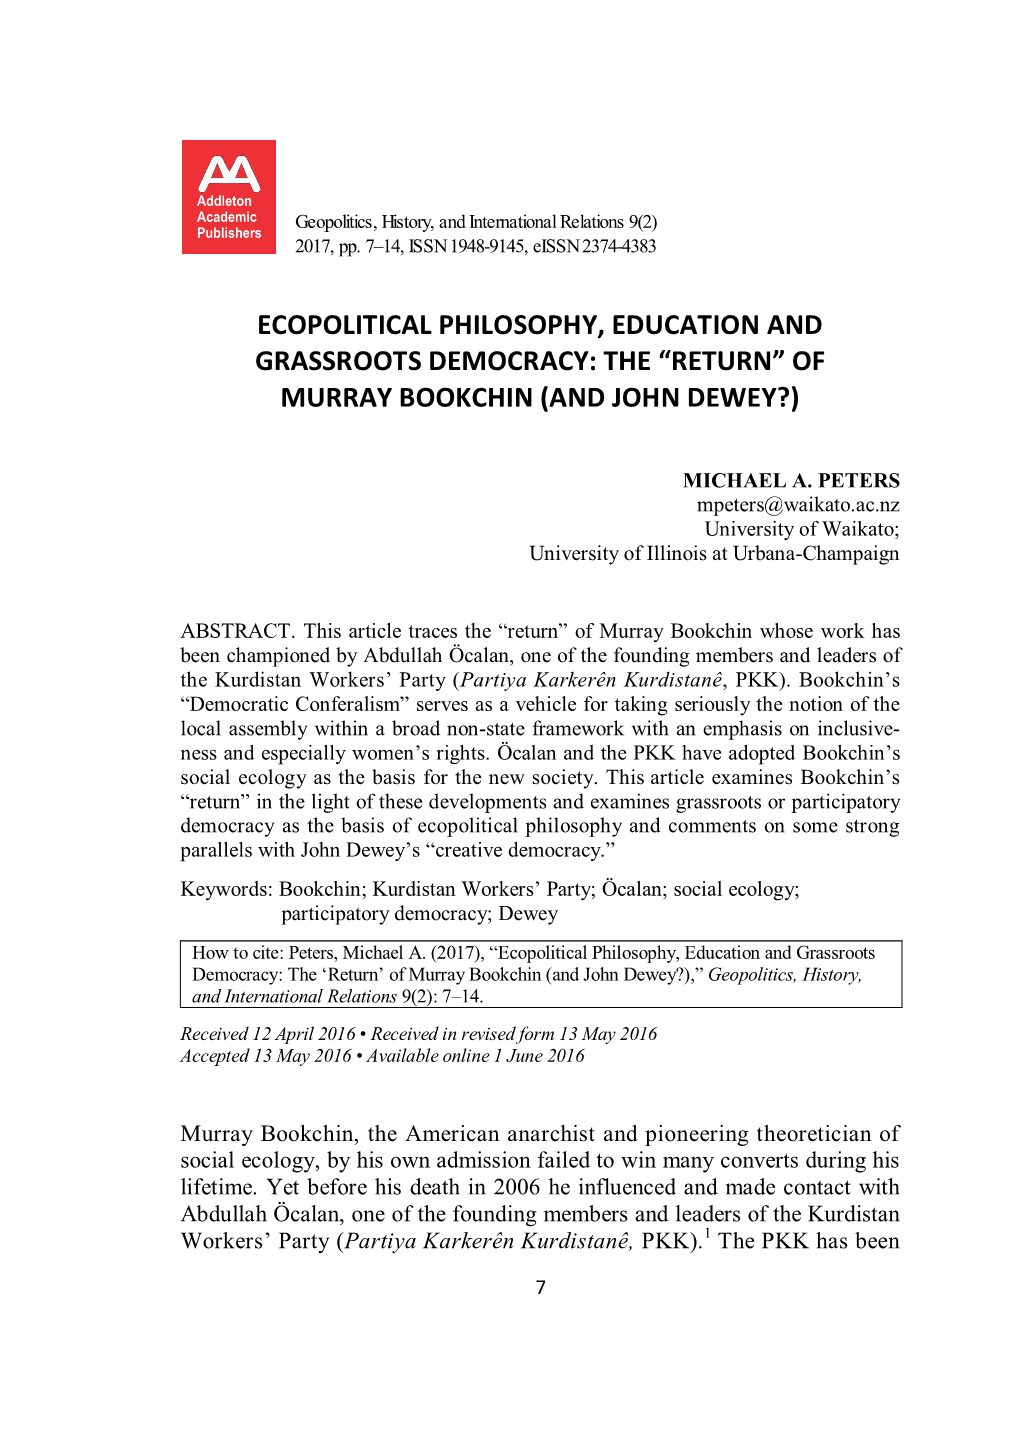 Ecopolitical Philosophy, Education and Grassroots Democracy: the “Return” of Murray Bookchin (And John Dewey?)